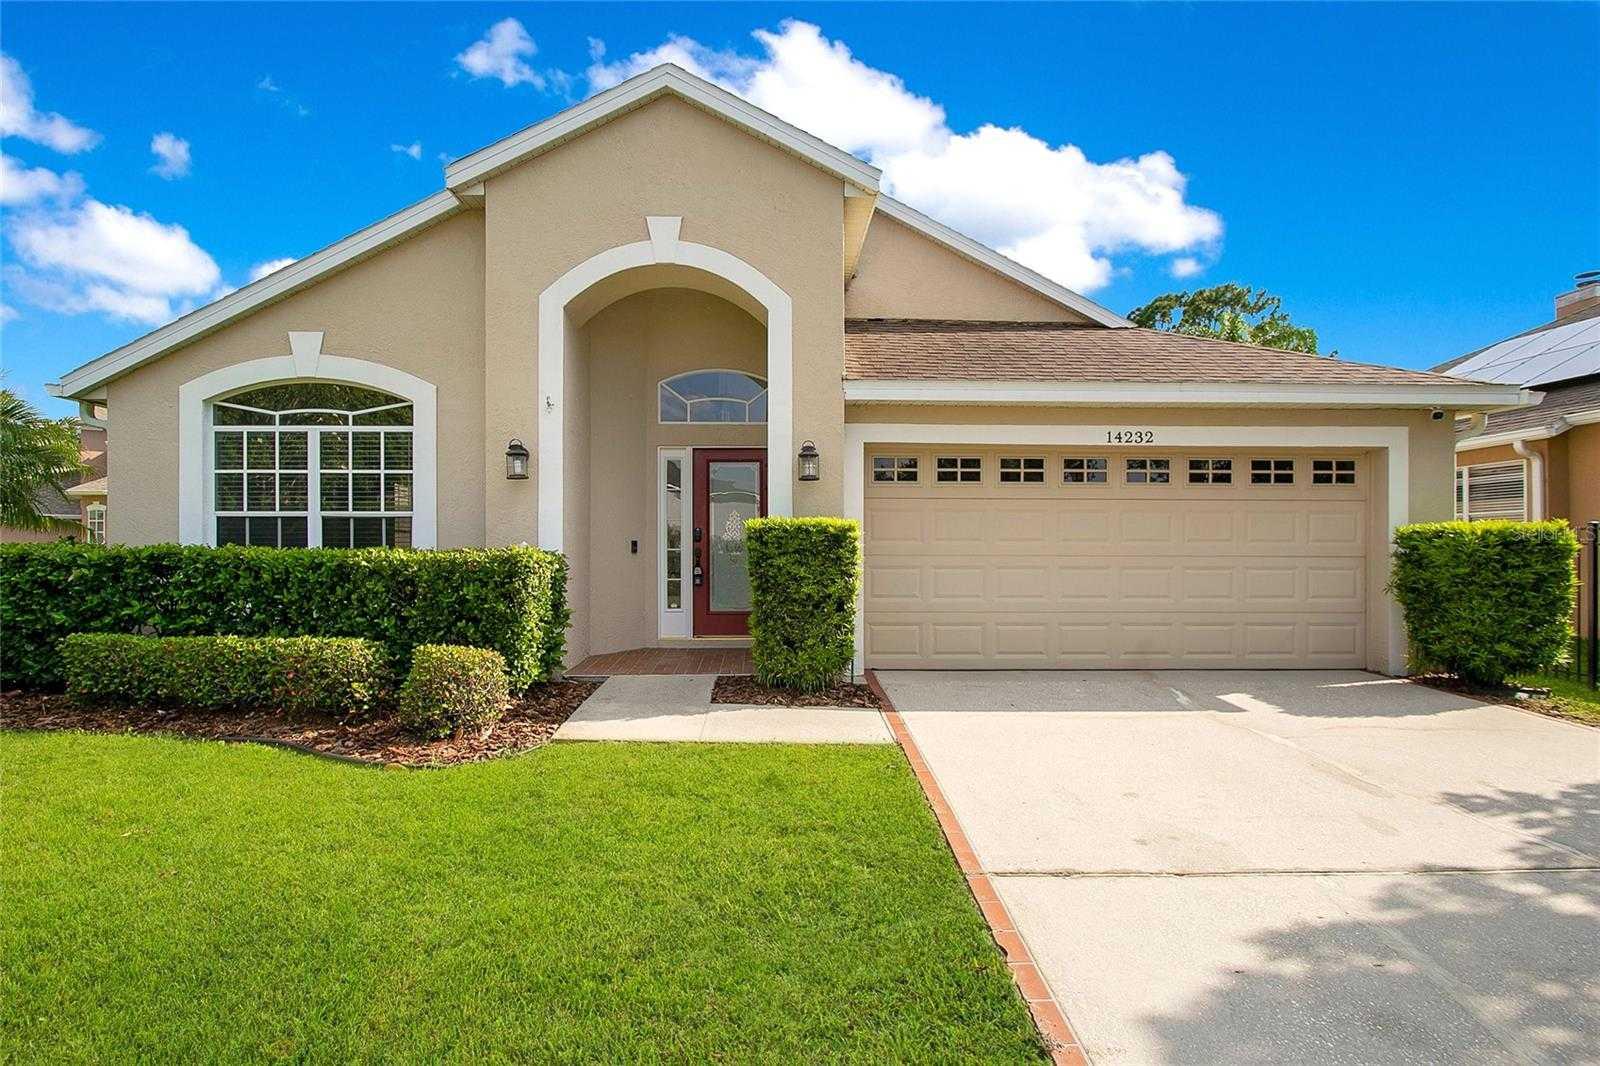 14232 SPORTS CLUB WAY, ORLANDO, Single-Family Home,  for sale, InCom Real Estate - Sample Office 